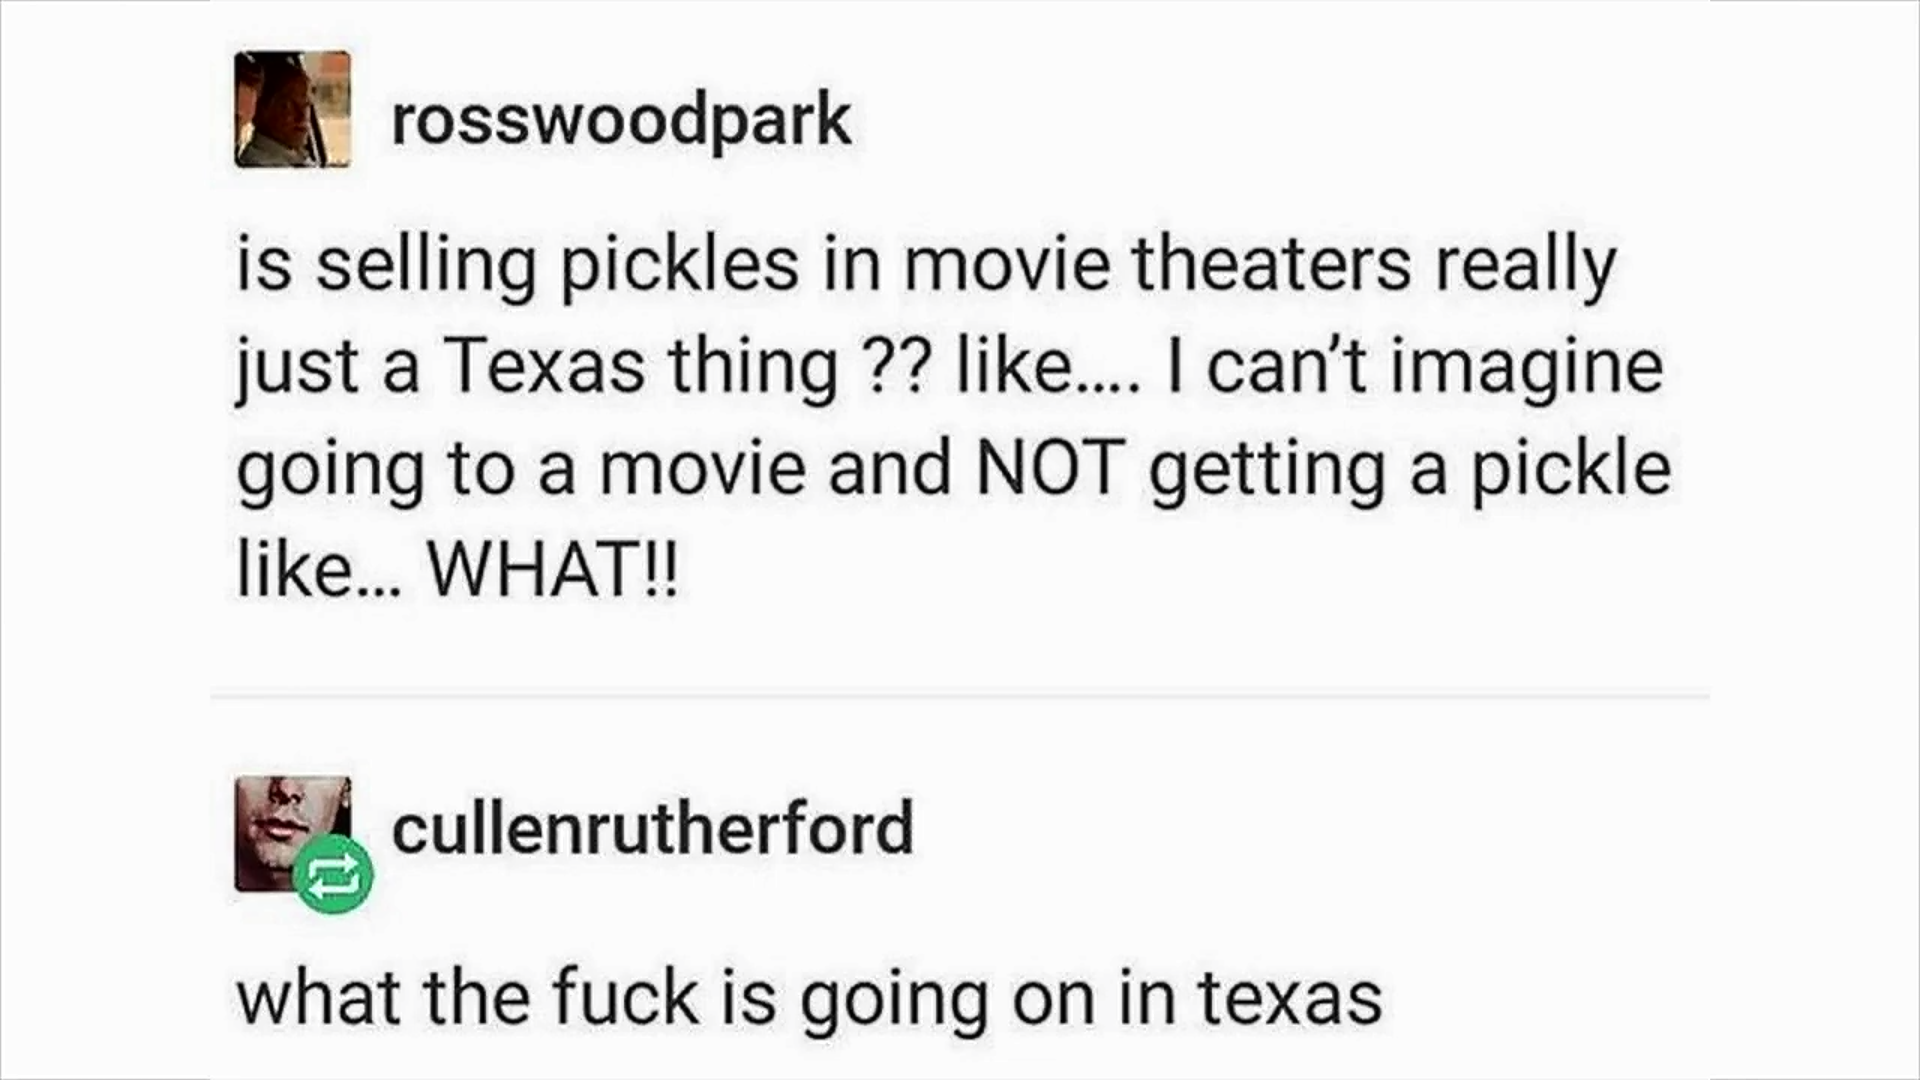 pickles in movie theaters in texas - rosswoodpark is selling pickles in movie theaters really just a Texas thing ?? .... I can't imagine going to a movie and Not getting a pickle ... What!! 4 cullenrutherford what the fuck is going on in texas